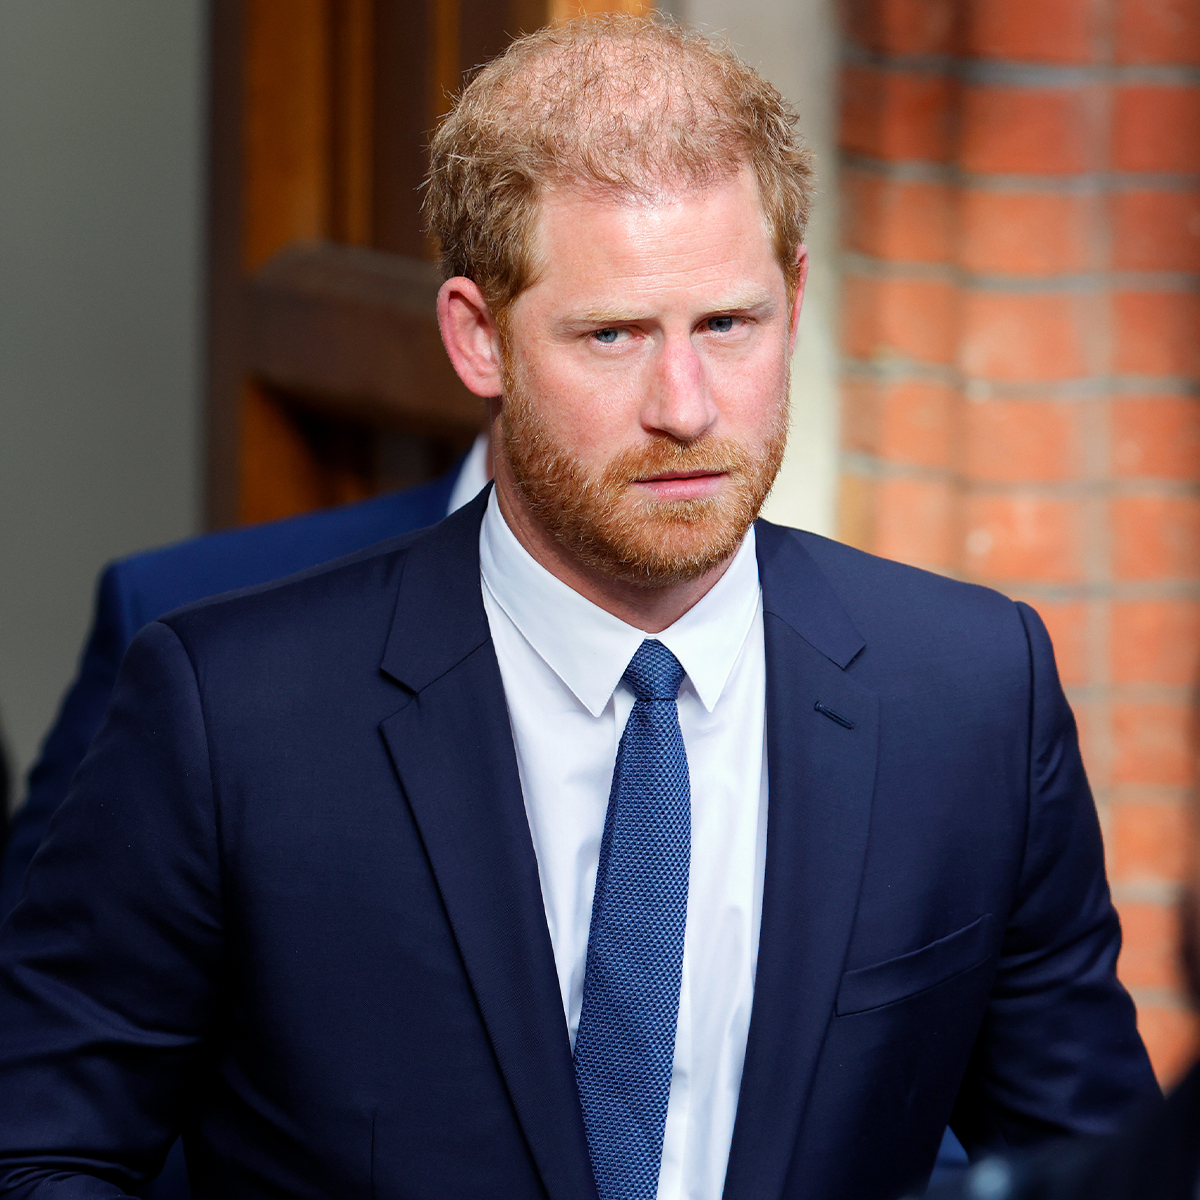 Prince Harry Slams Royal Institution for Allegedly Withholding Info